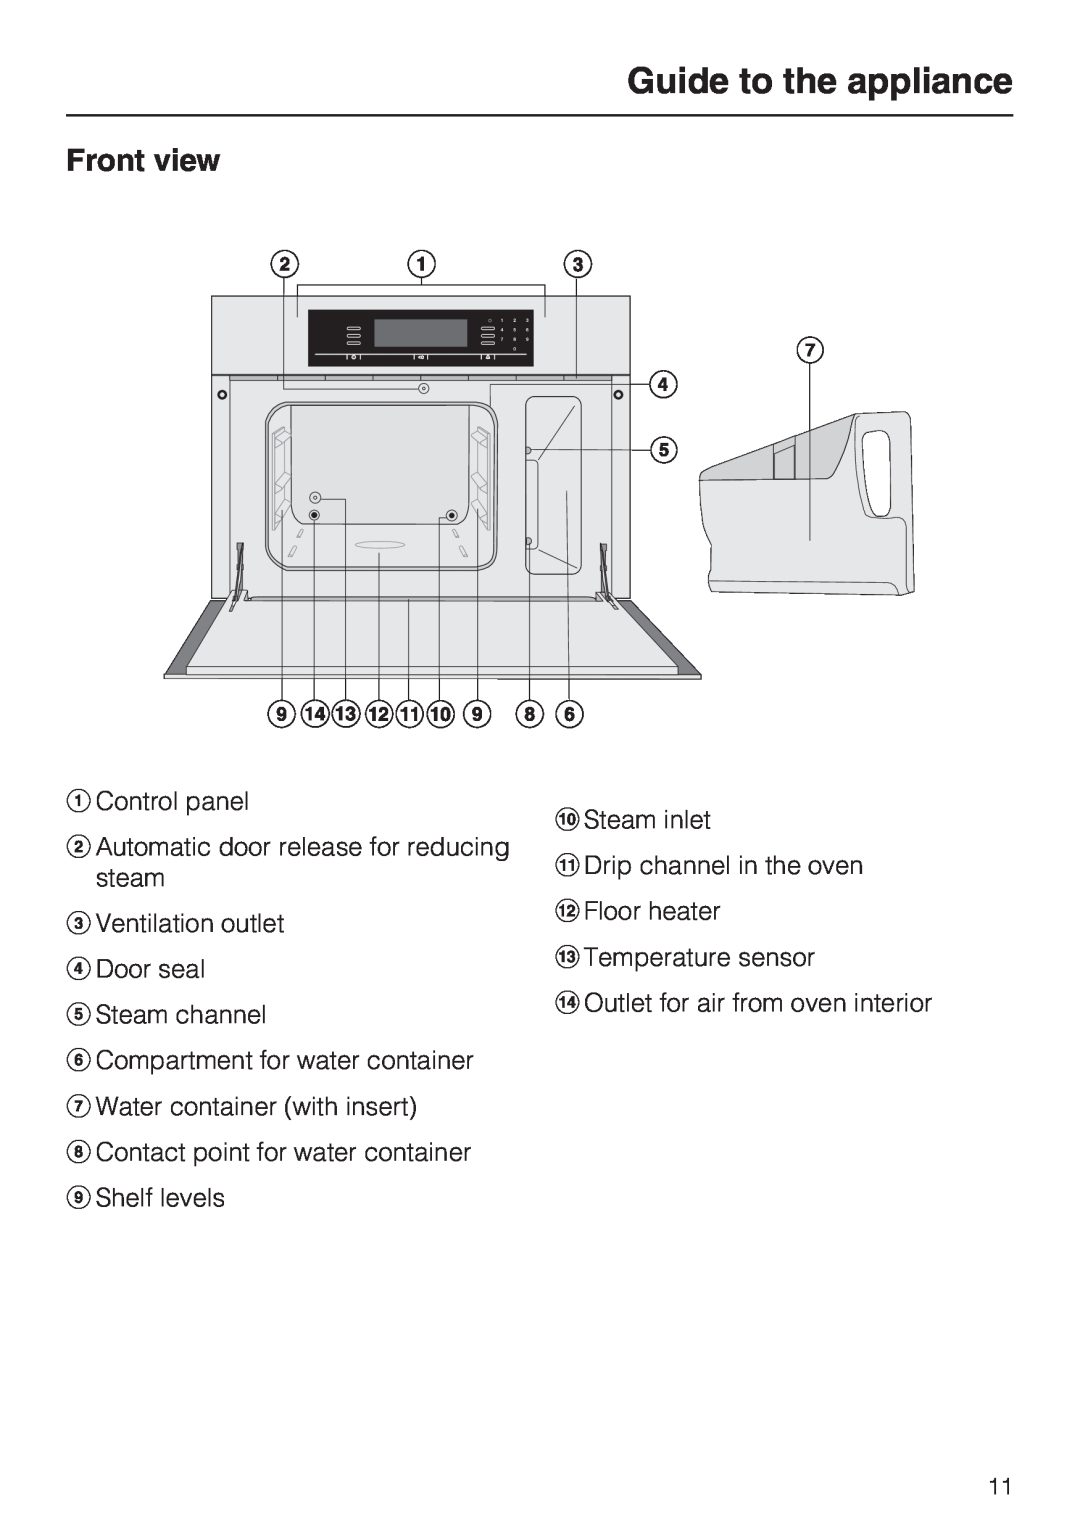 Miele DG 5080, DG 5070, DG 5088 installation instructions Guide to the appliance, Front view 